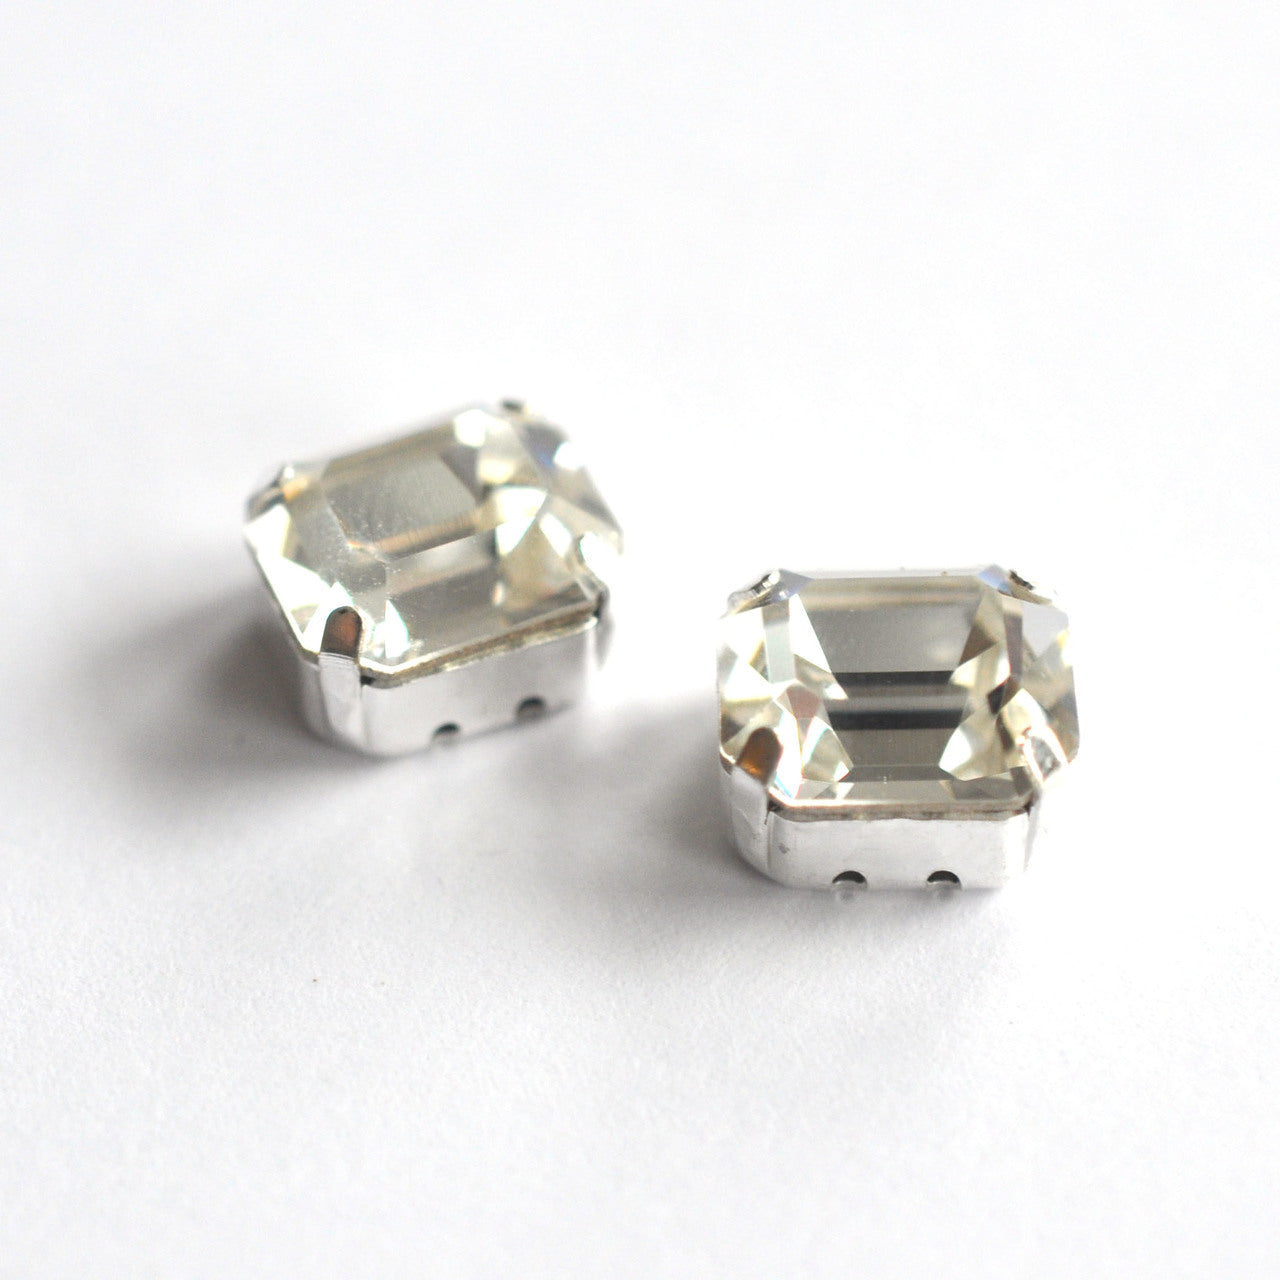 Crystal Clear 12x10mm Octagon Sew On Crystals - 2 Pieces